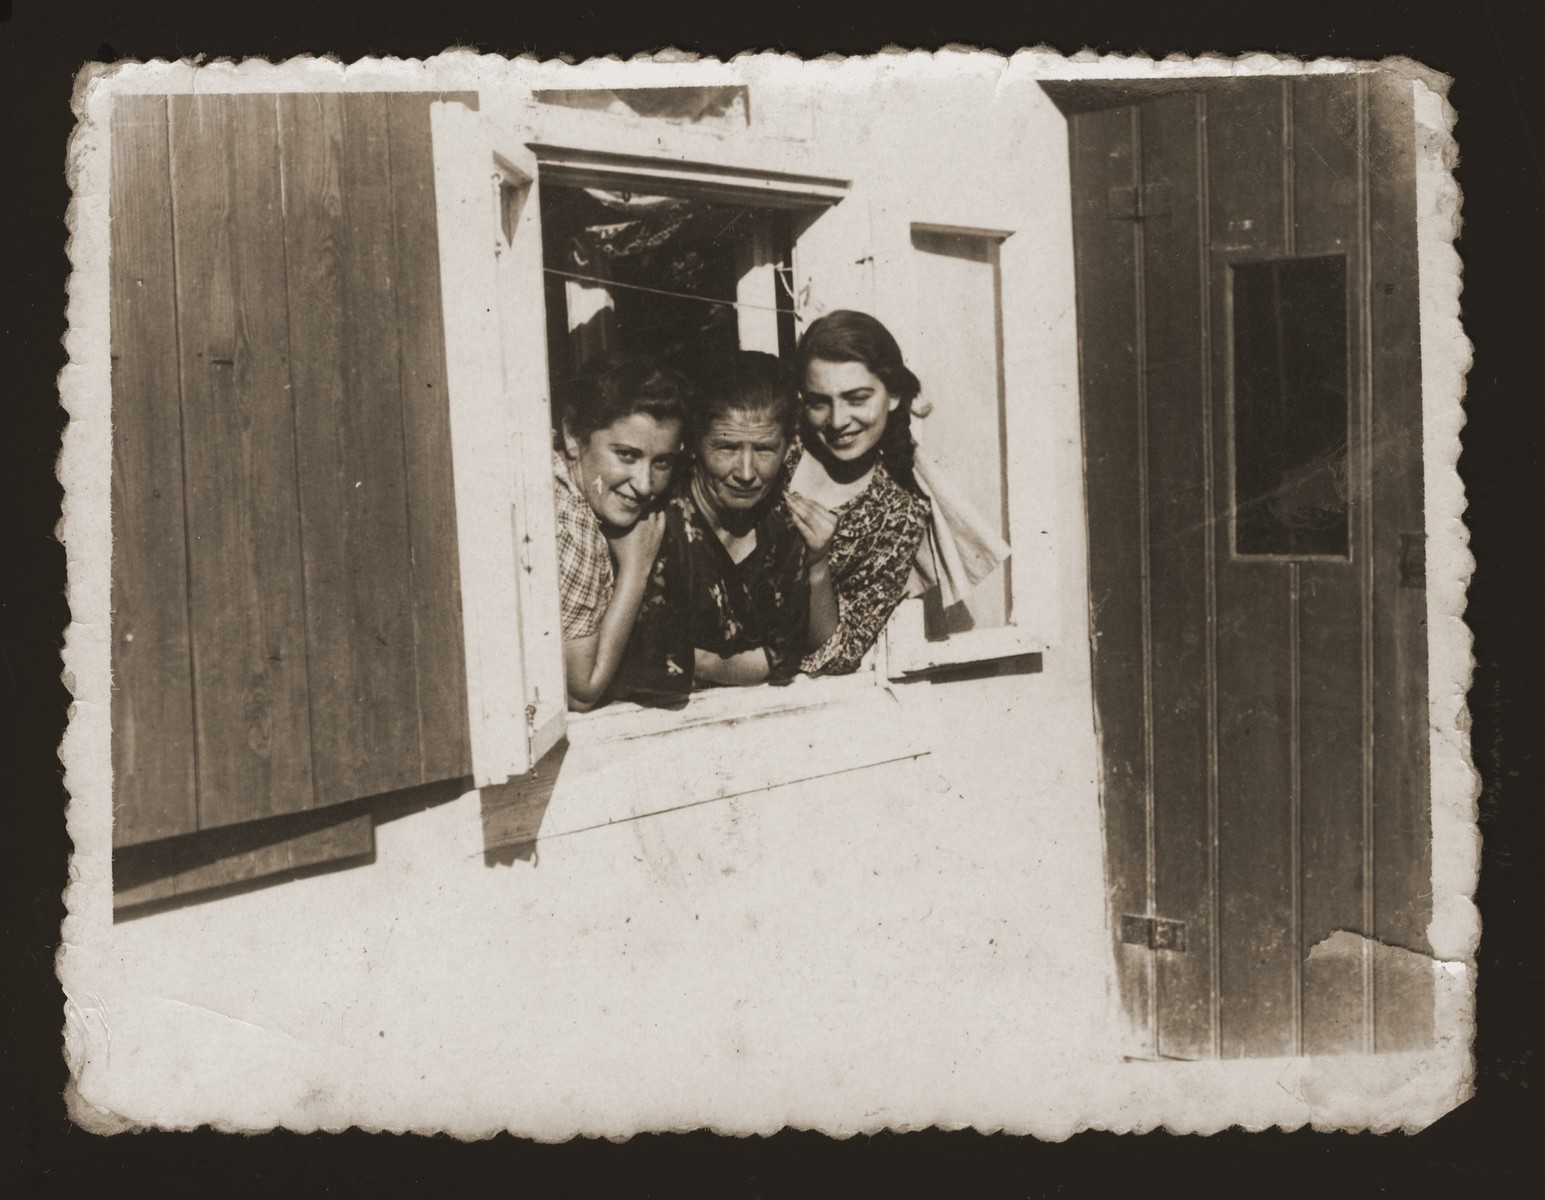 Three Jewish women look out the window of a house in Maciejow.

Among those pictured is Estera Ajzen (right) during a visit to her friend's home.